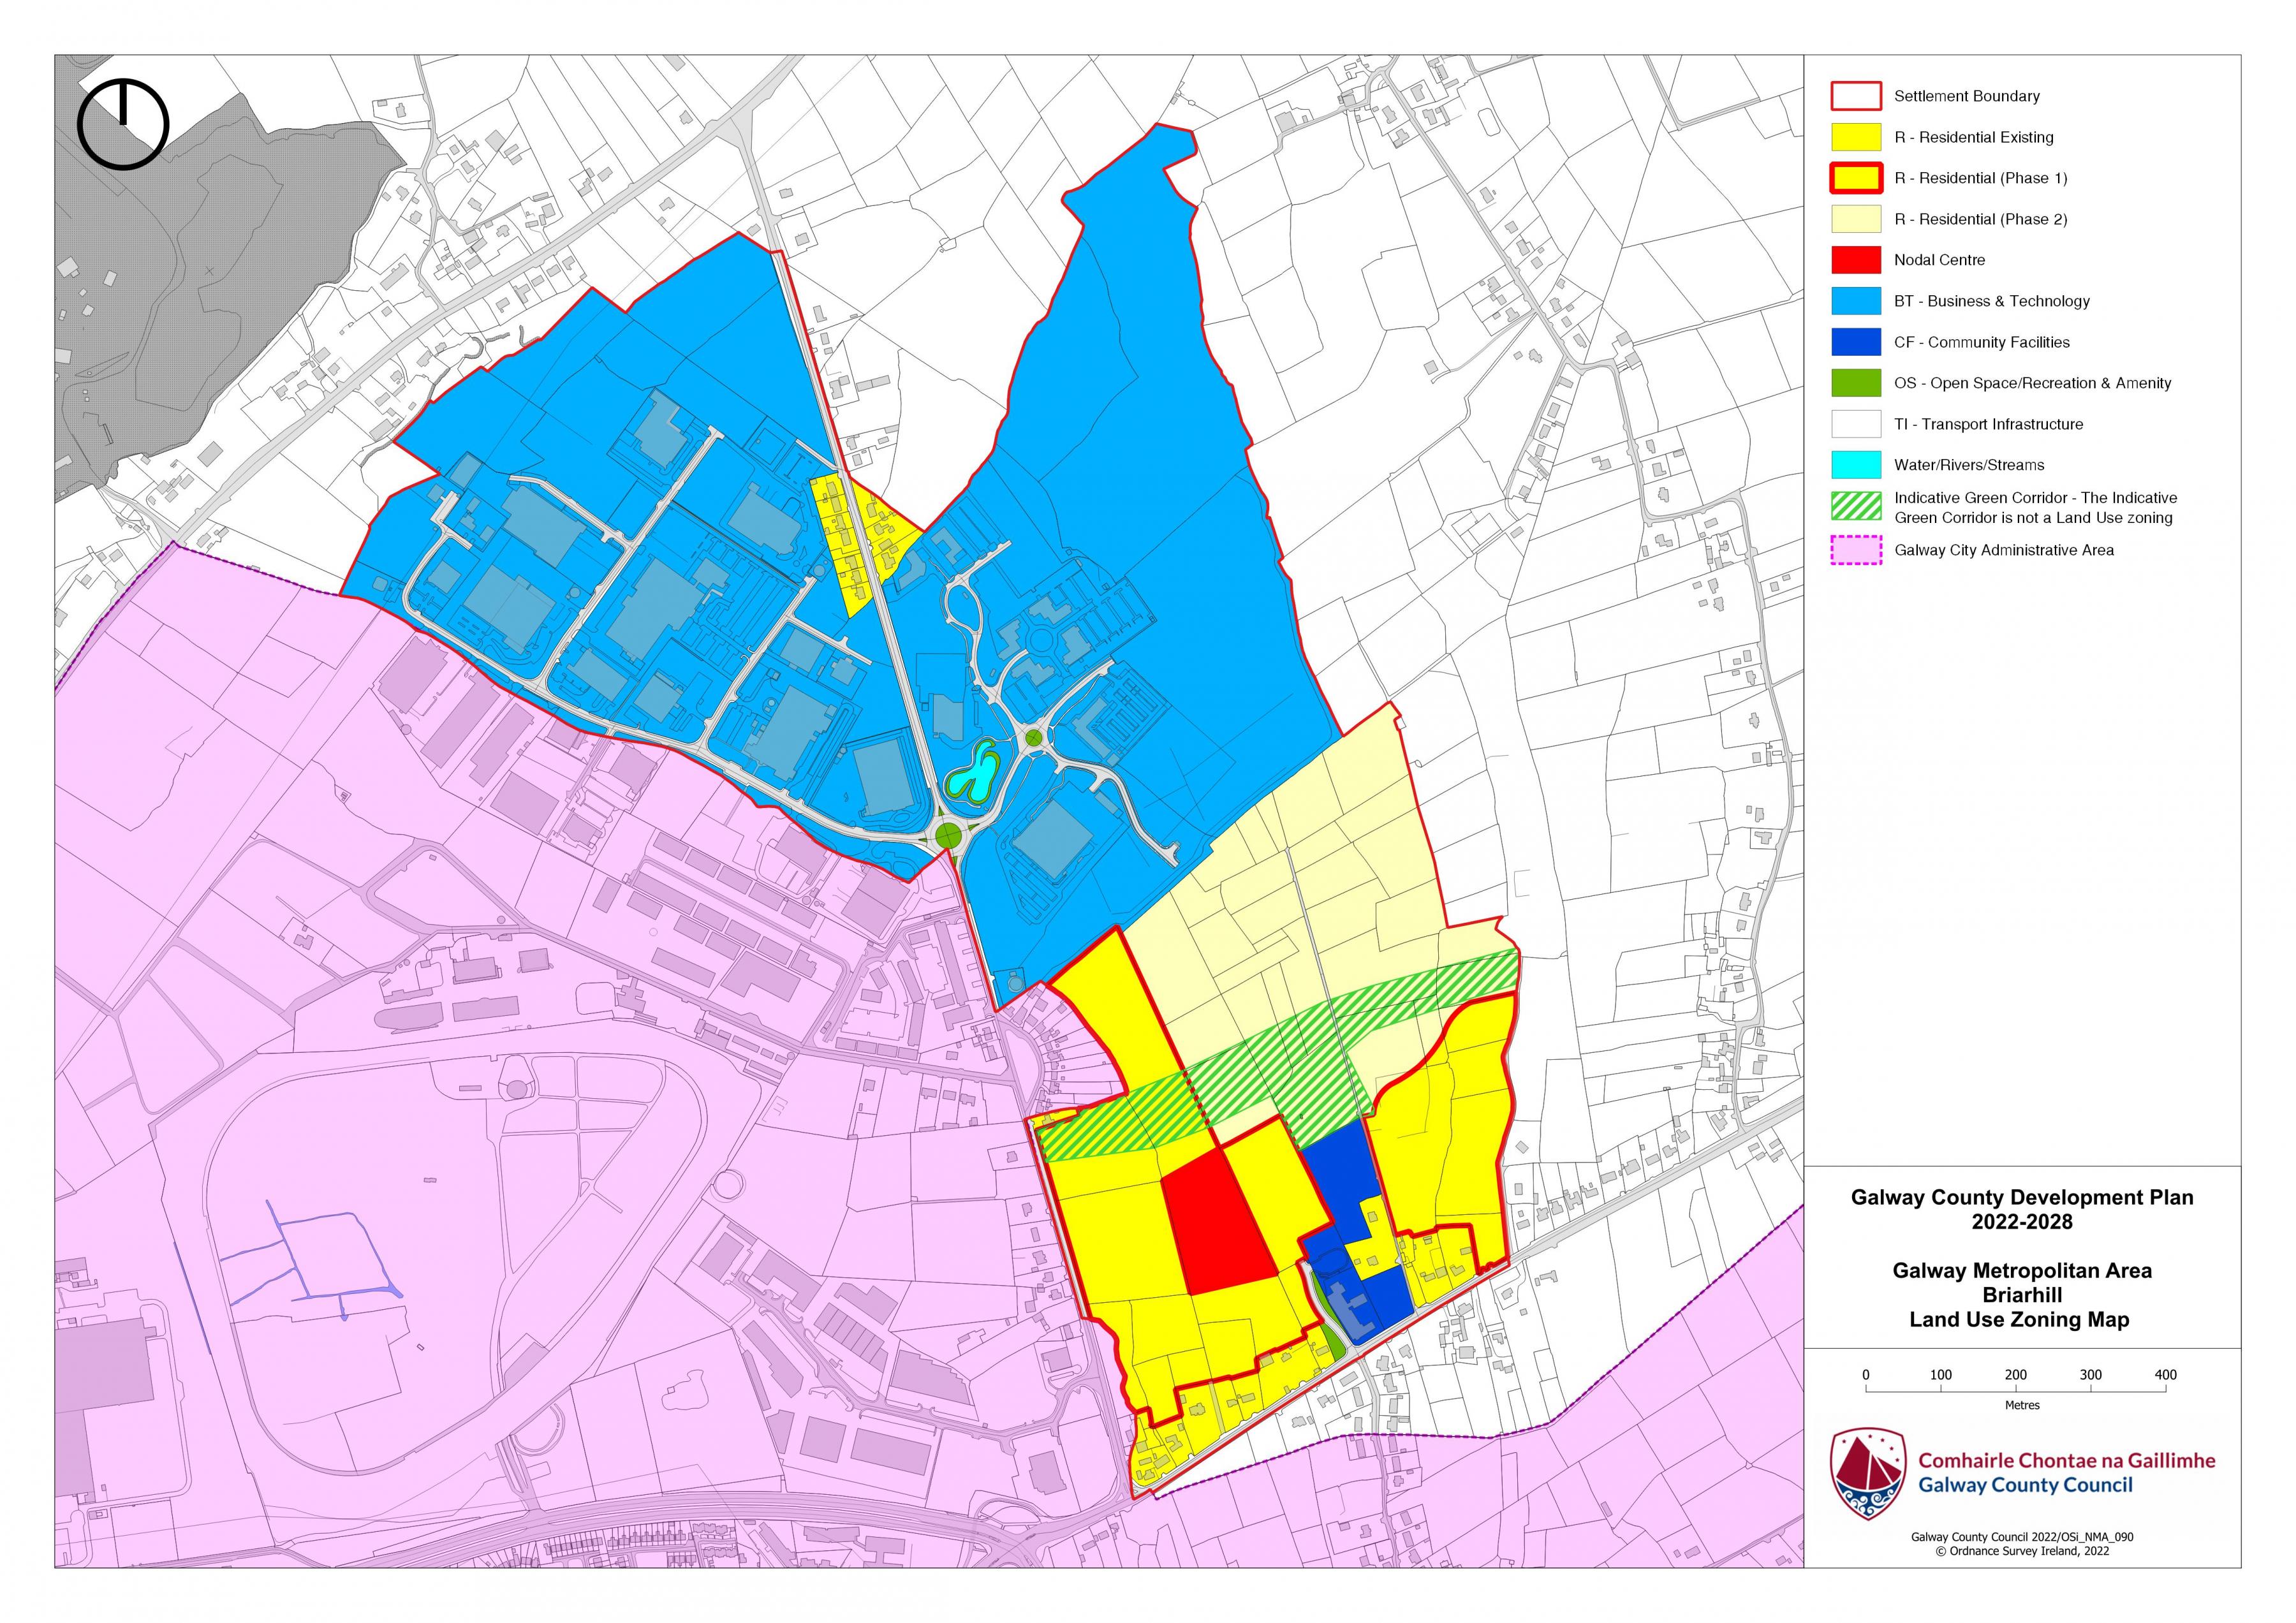 Briarhill Land Use Zoning Map